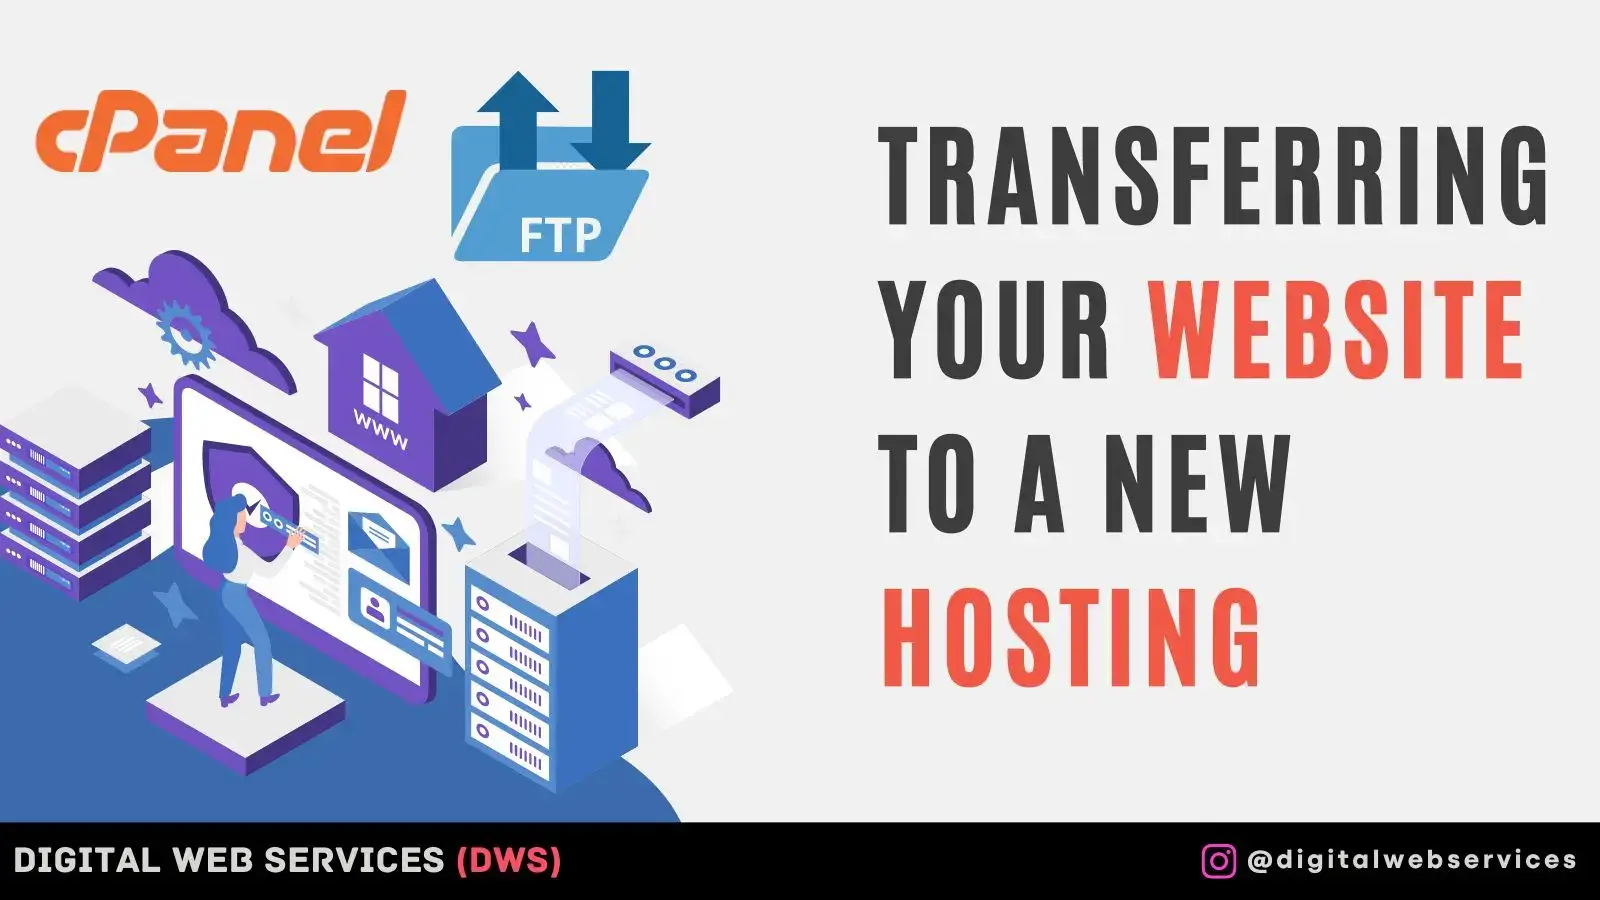 Tips for Transferring Your Website to a New Hosting